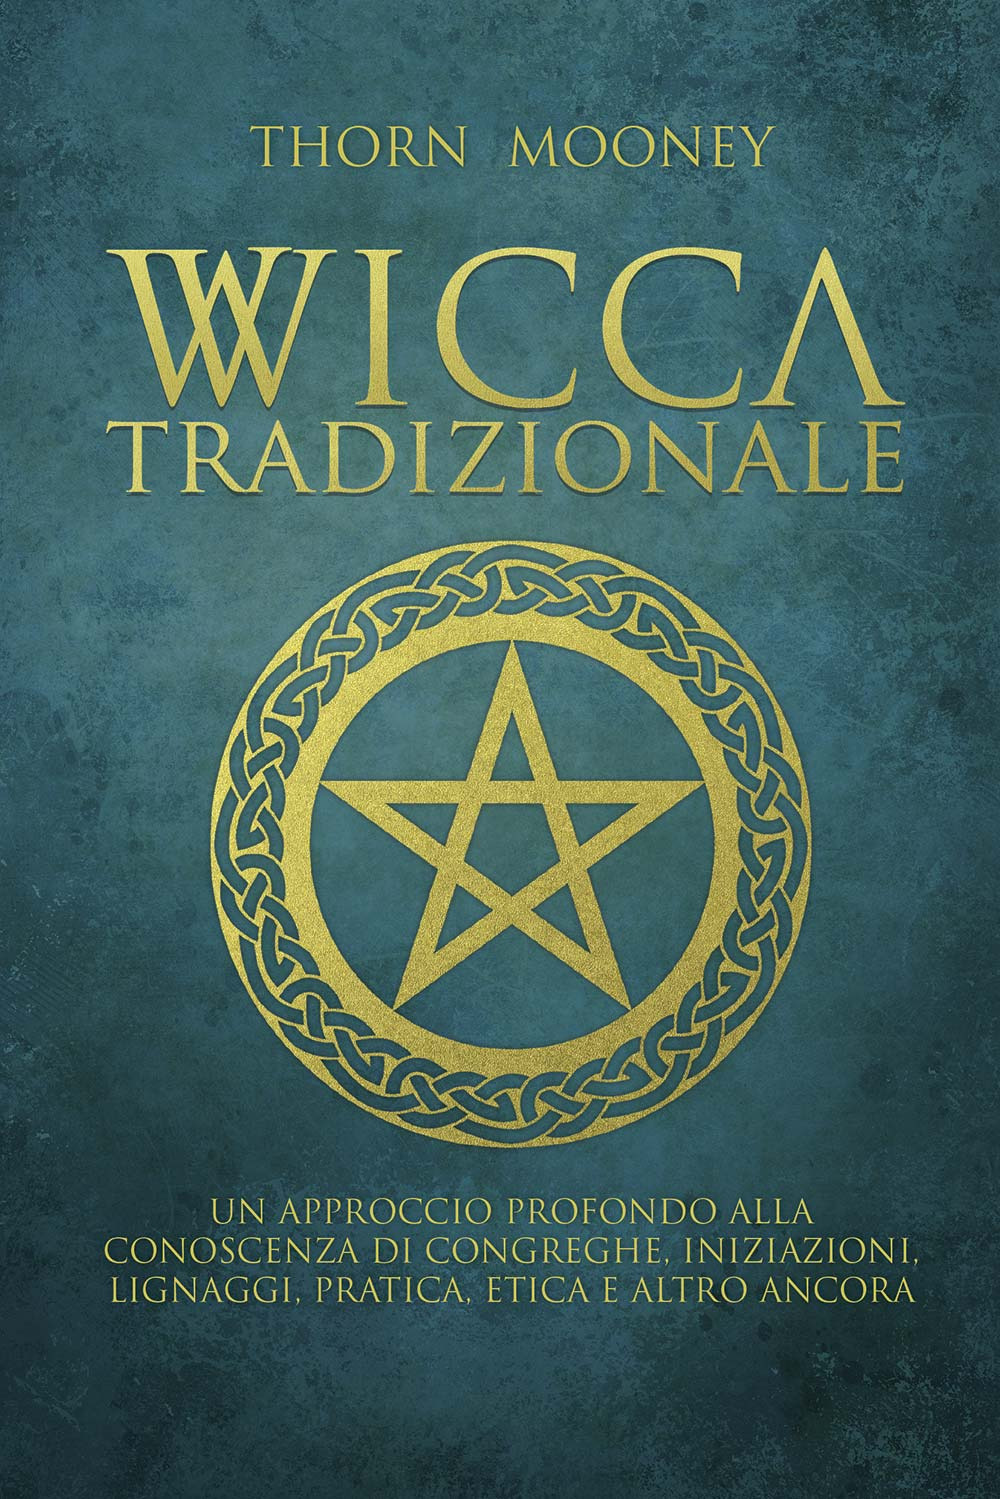 Image of Wicca tradizionale